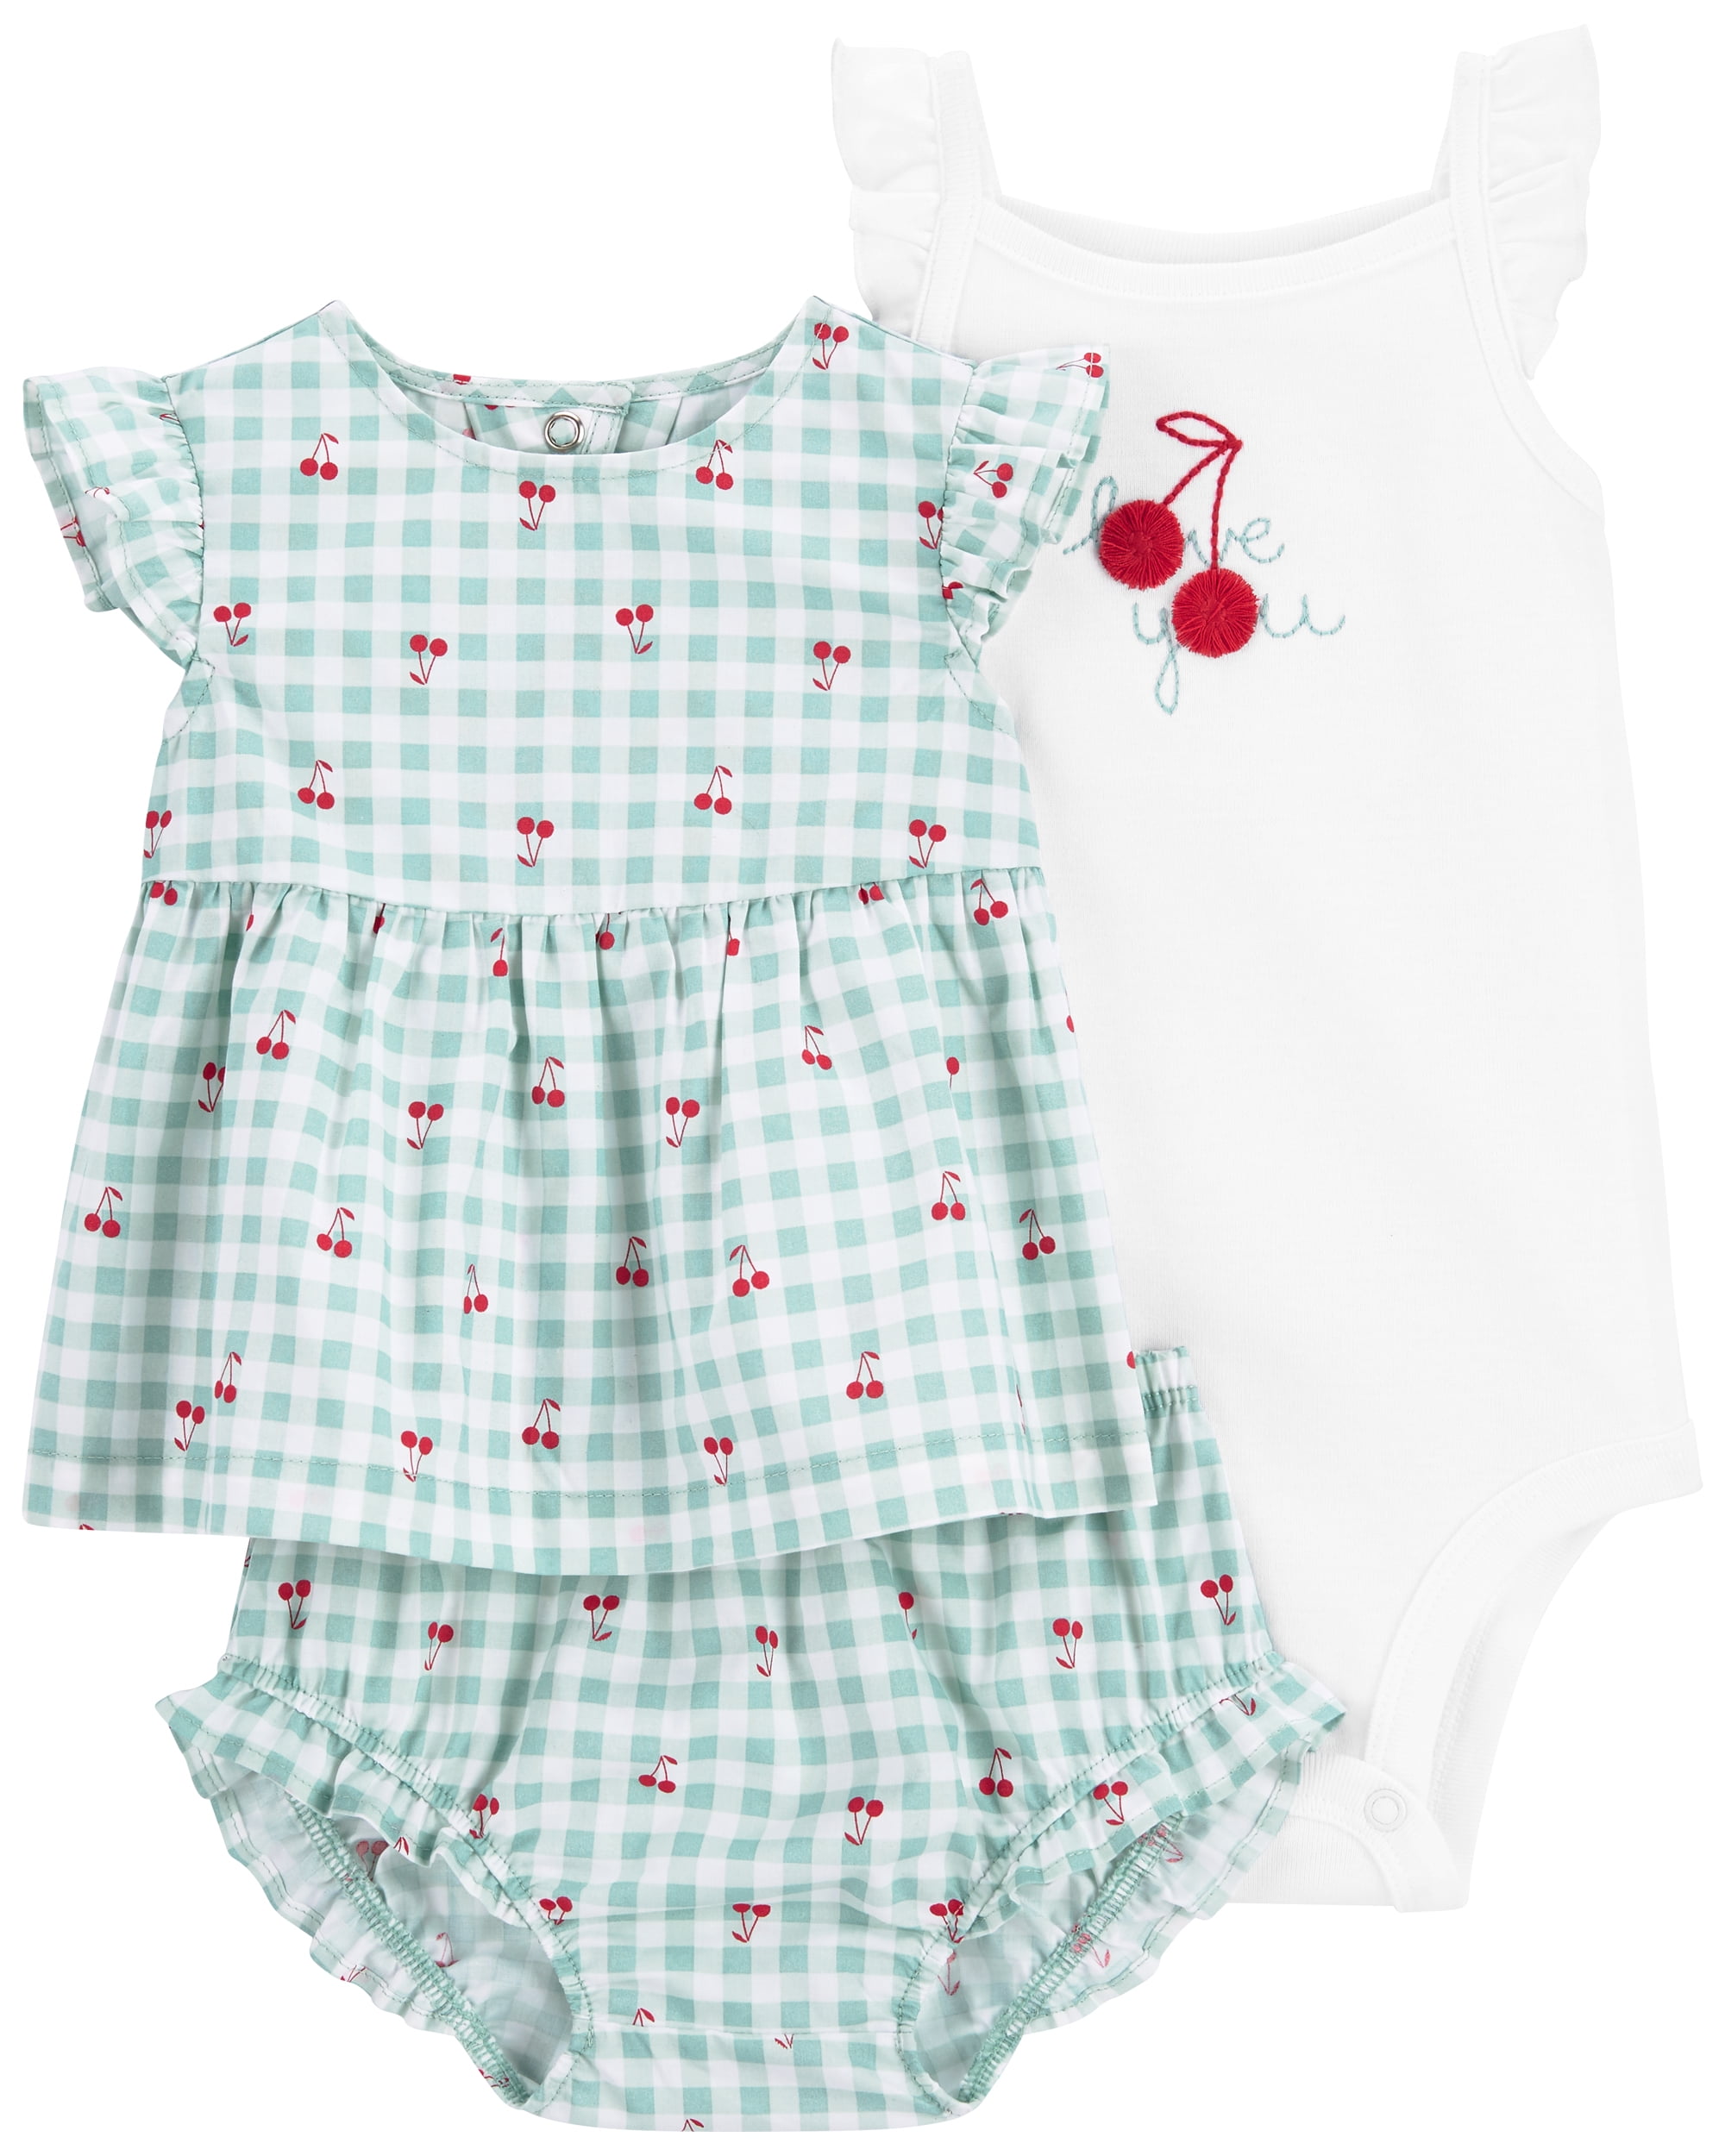 New Carter's Girls 1 Piece Outfit Romper Ice Cream Treats Ruffle Rear 6 9 12 24m